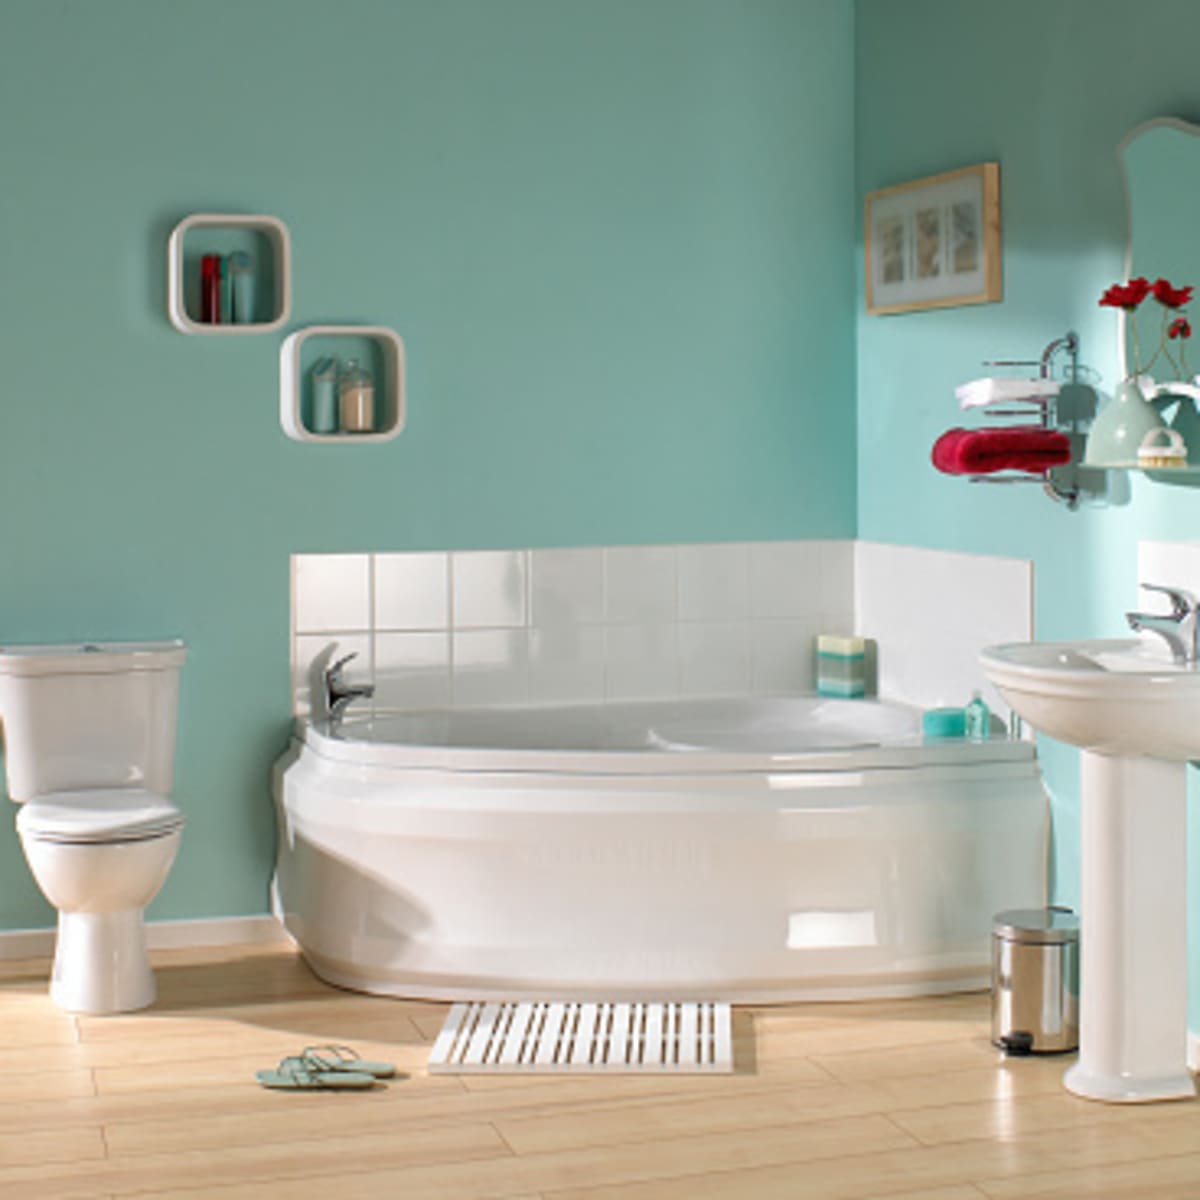 Is a 3-Way-Bathroom the perfect fit for me? - Designful Spaces